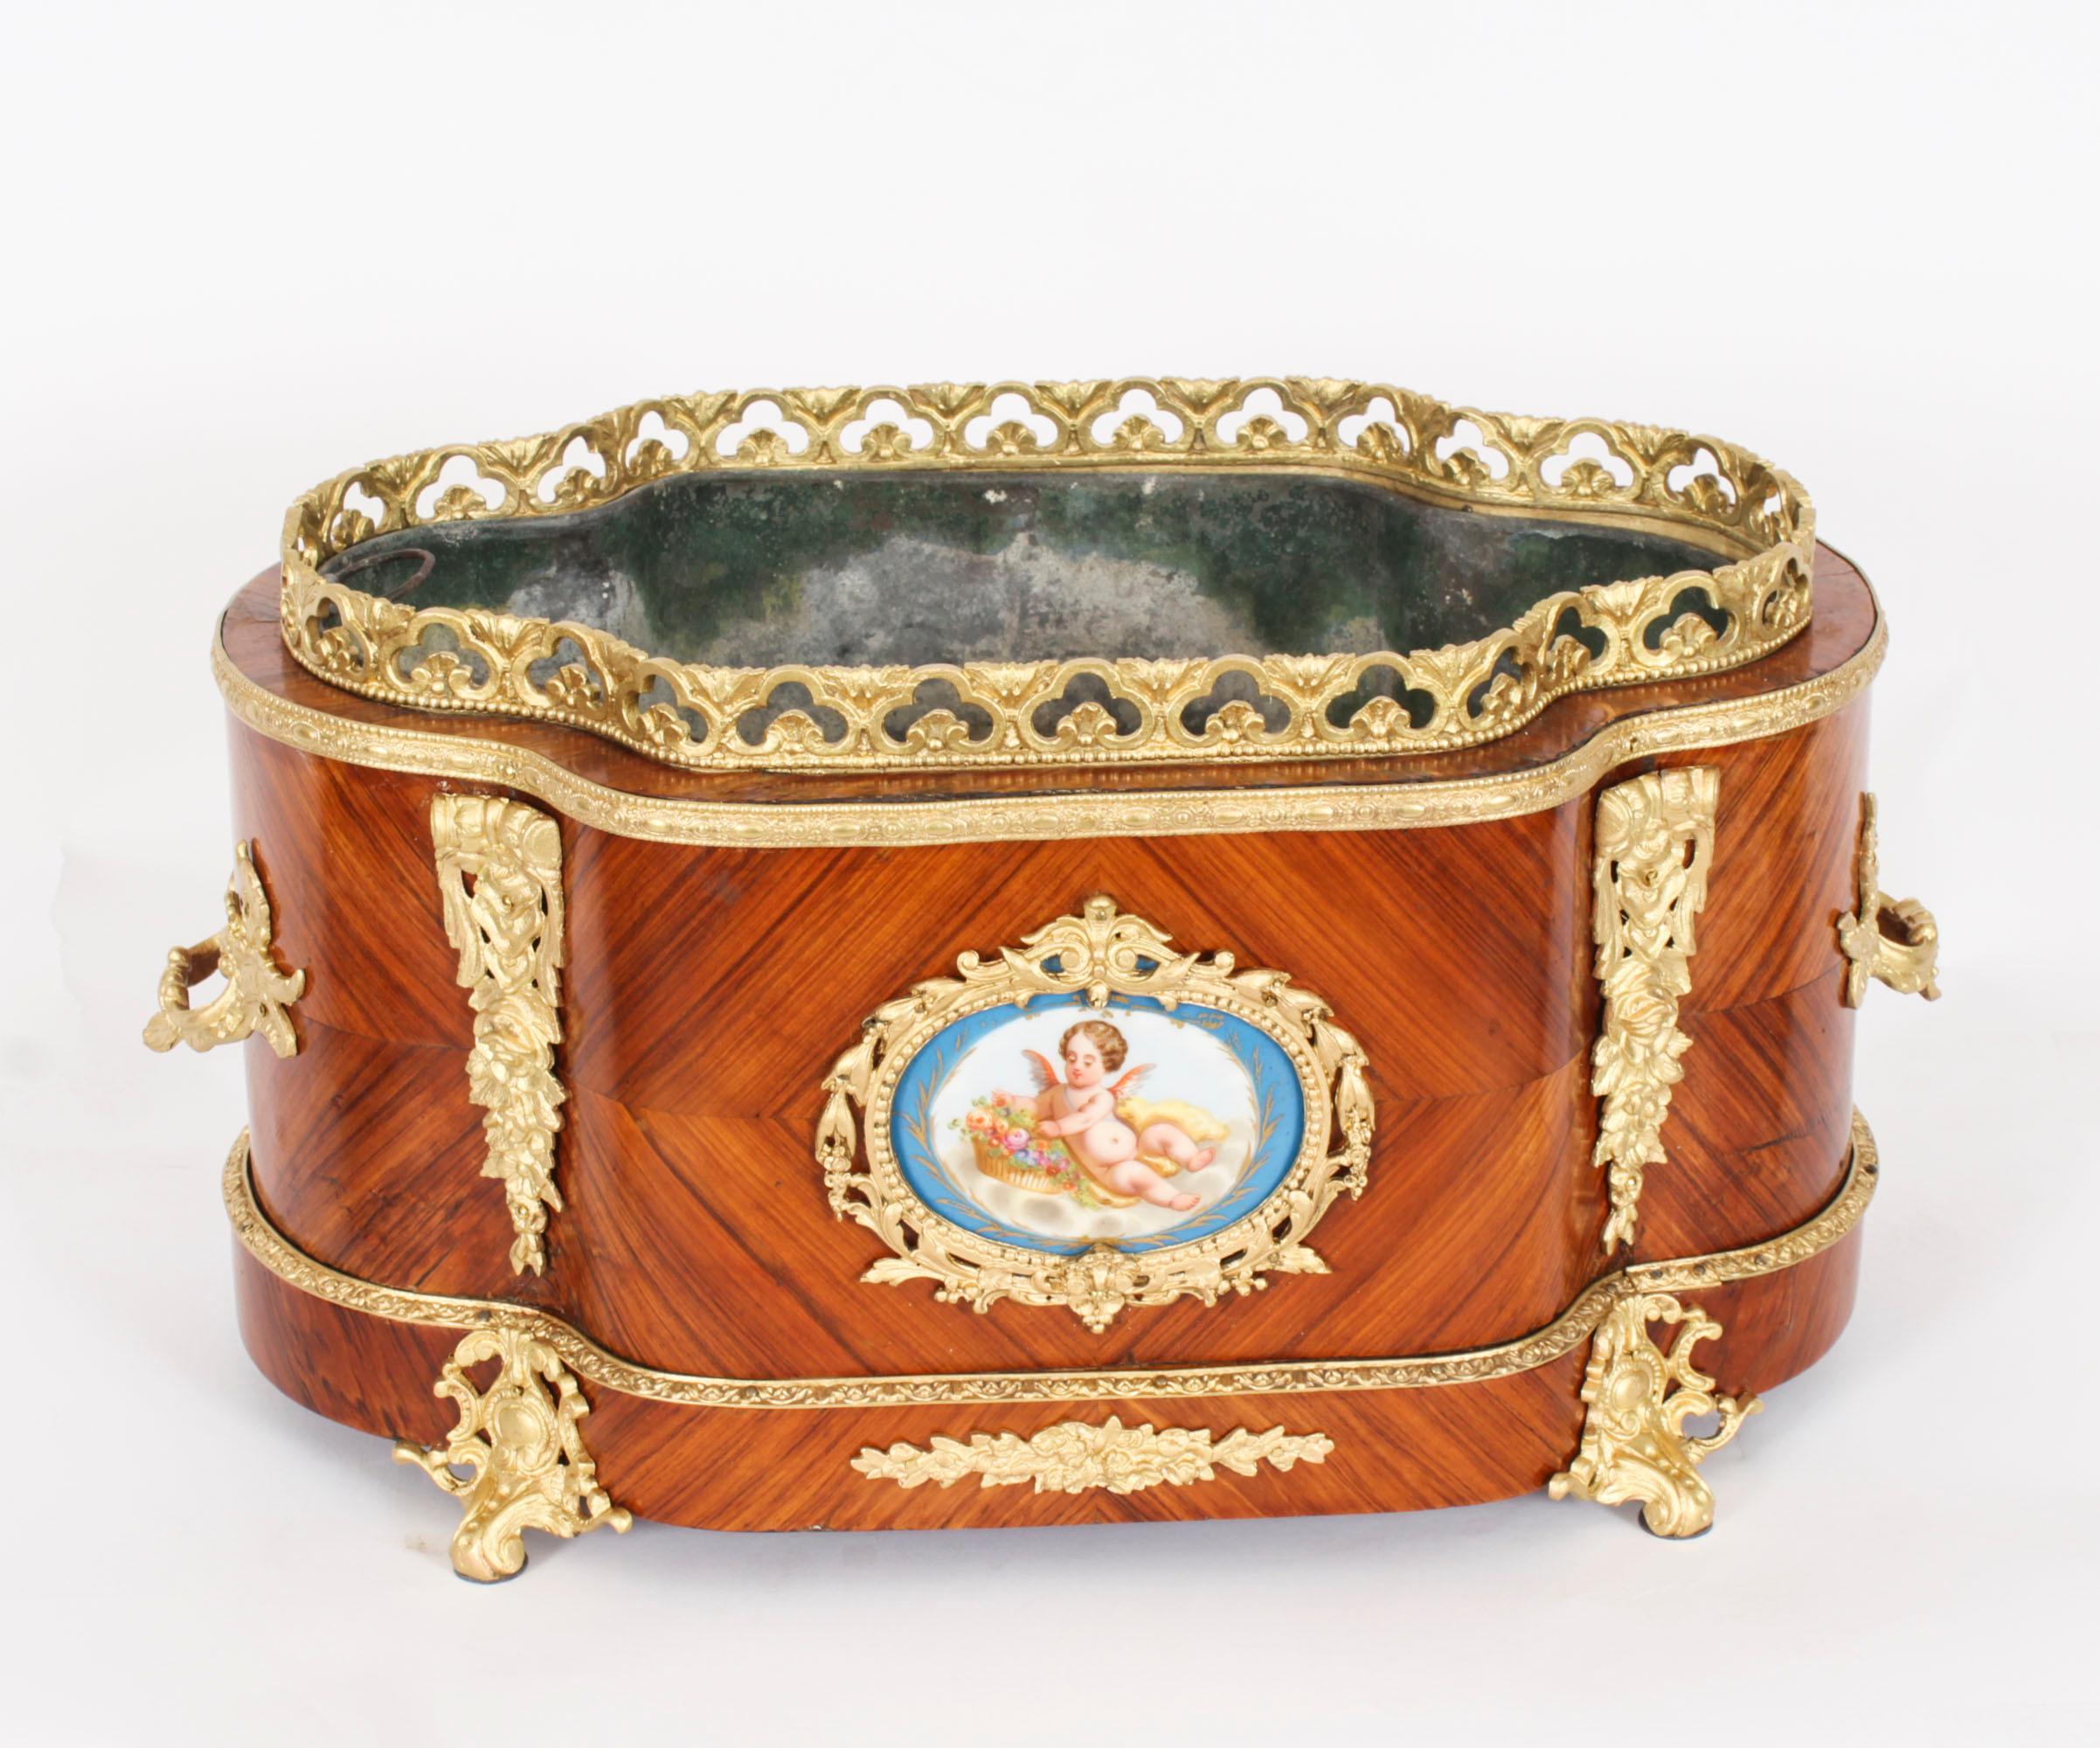 This is a superb antique French Louis XV revival ormolu and Sevres porcelain mounted, wood jardiniere, circa 1860 in date.
 
This beautiful shaped planter has splendid ormolu mounts enclosing two enchanting hand-painted and gilded Sevres porcelain